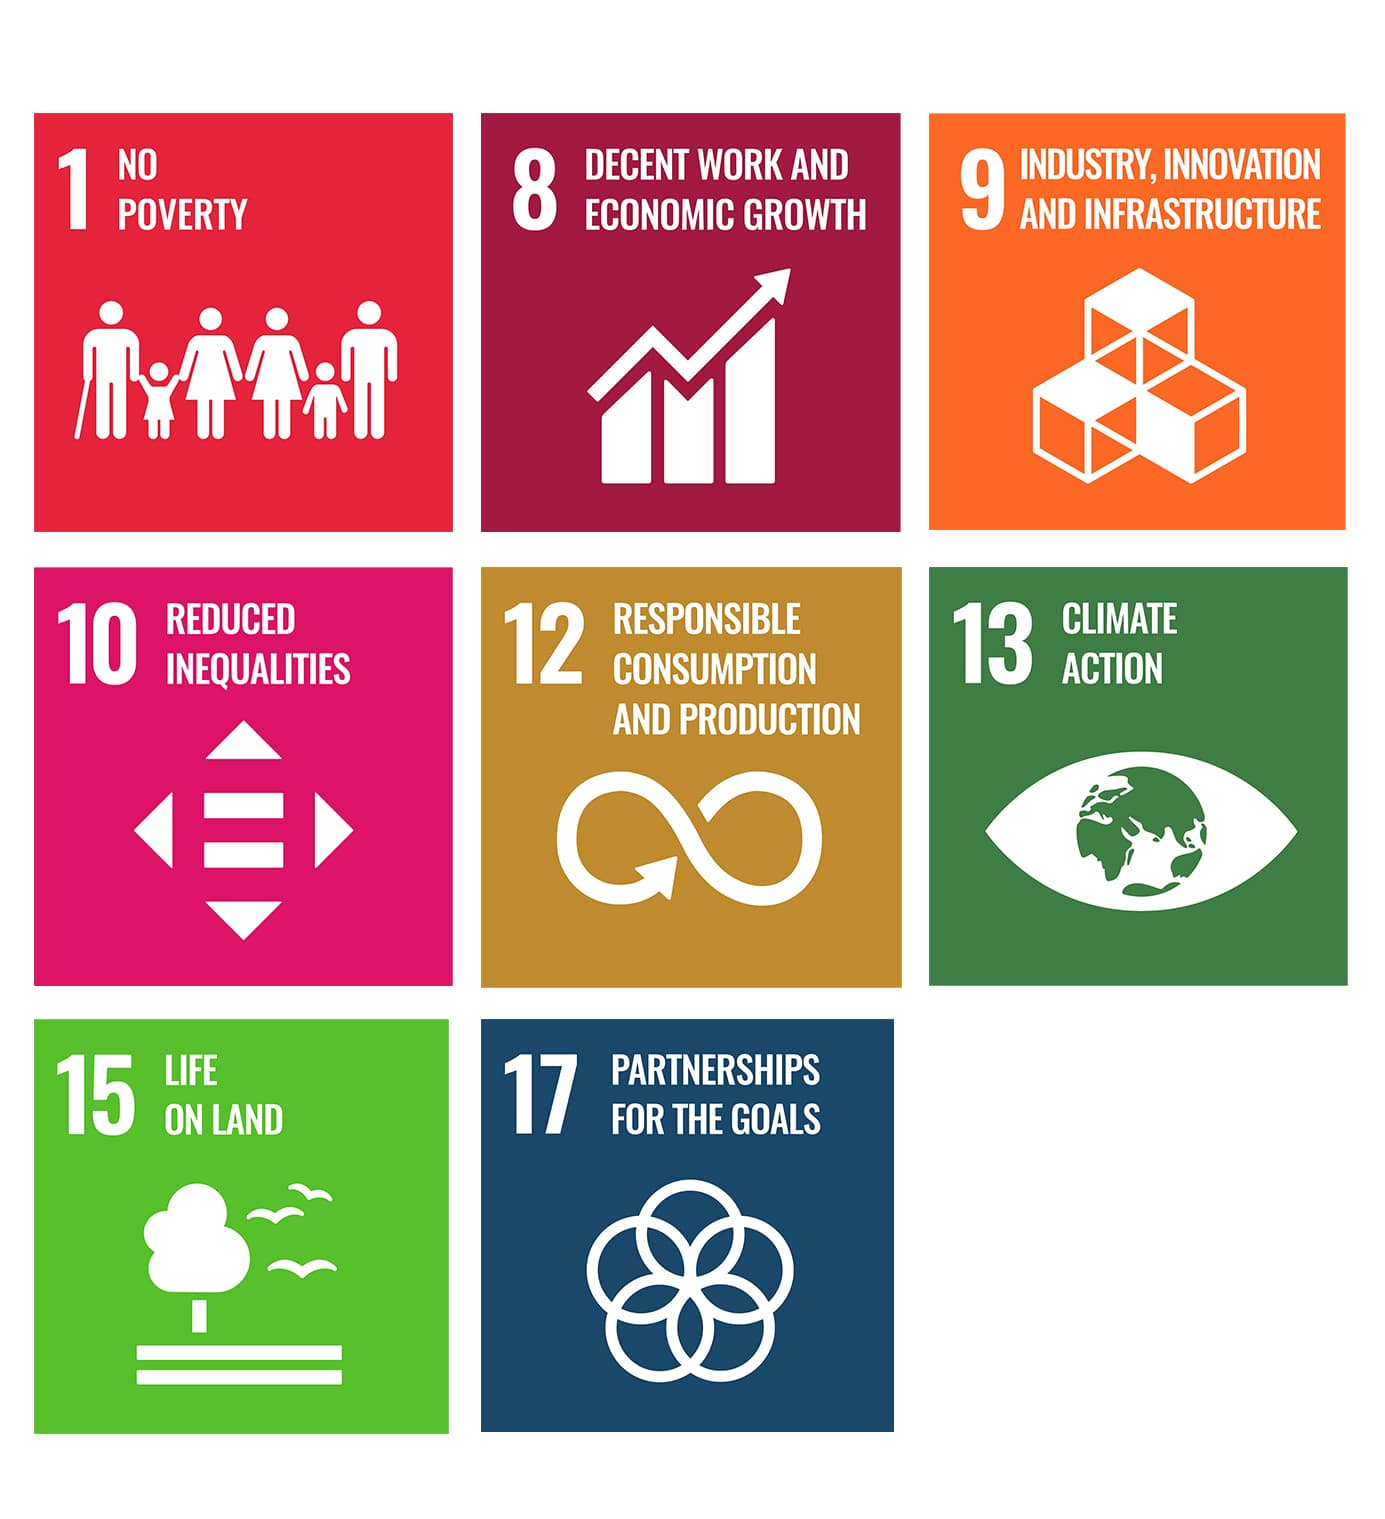 Our values, principles, and the UN Sustainable Development Goals